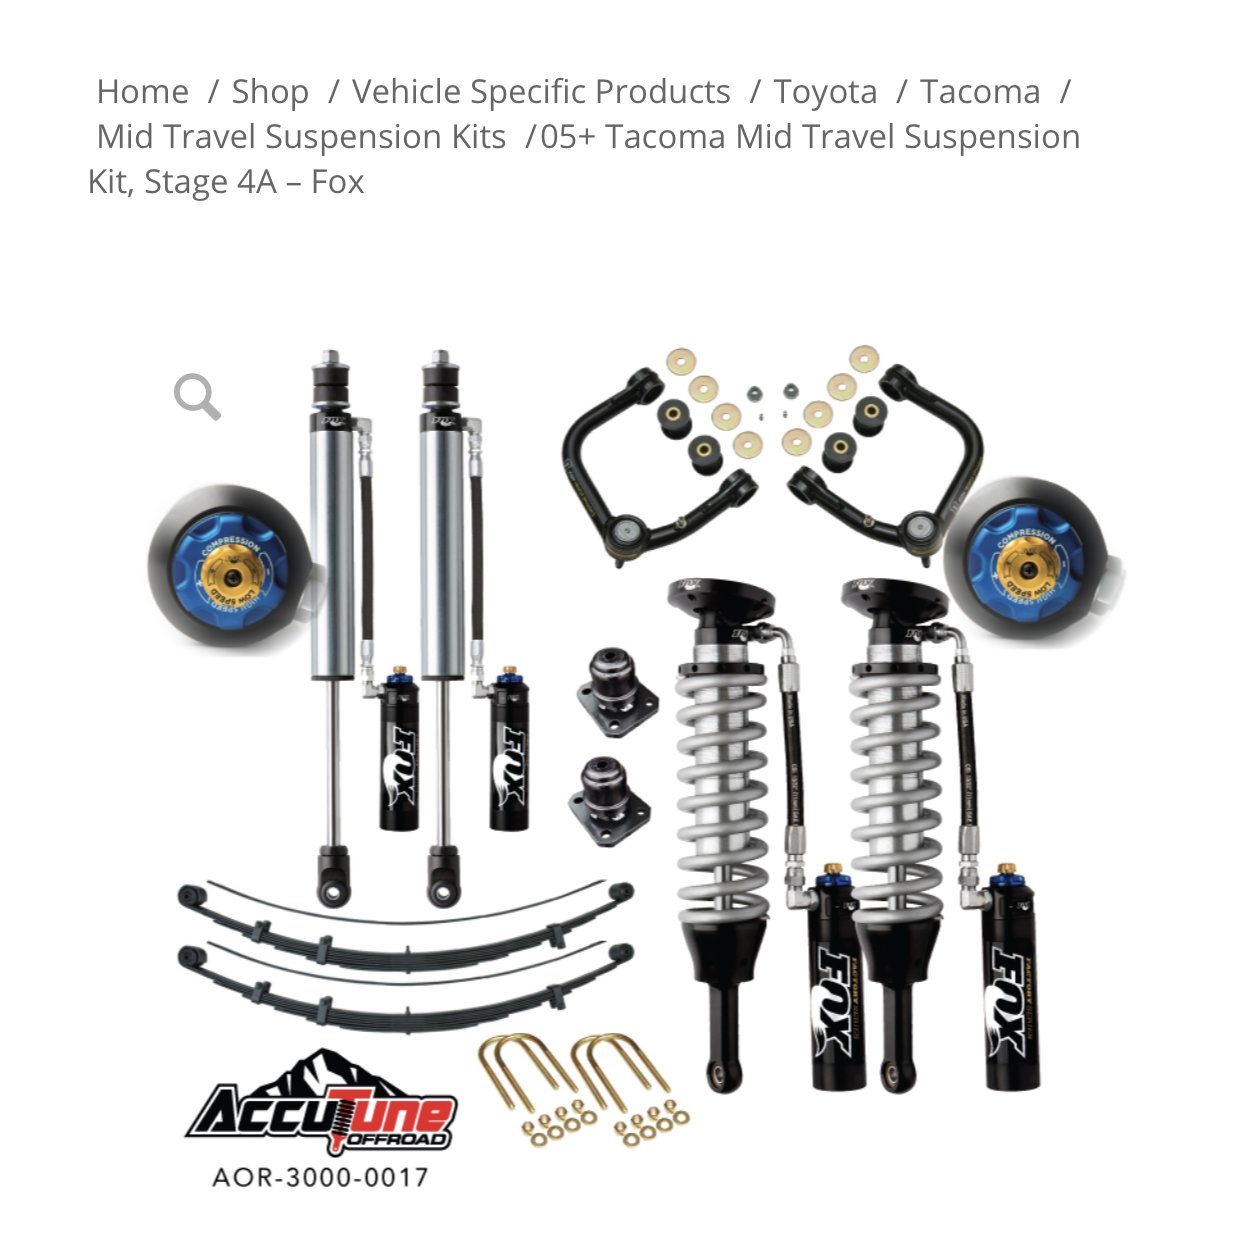 05+ Tacoma Mid Travel Suspension Kit, Stage 4A - Fox  AccuTune Off-Road (1).jpg